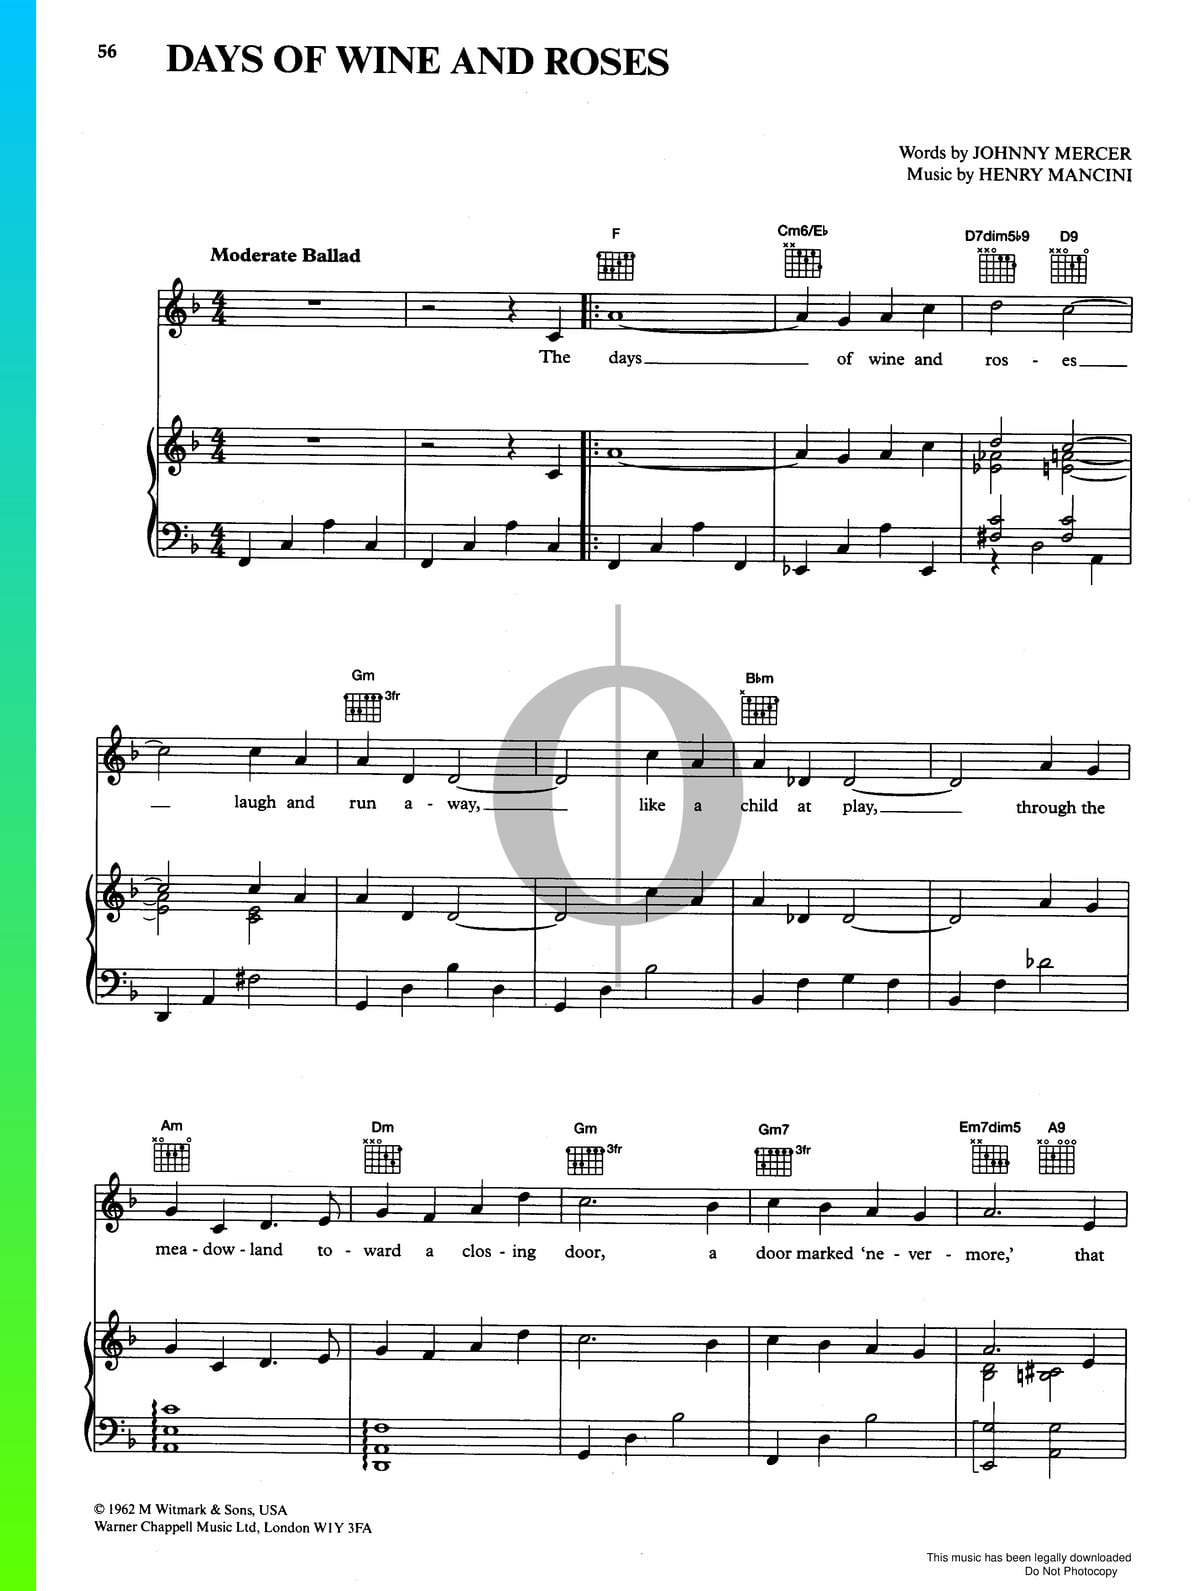 The Days Of Wine And Roses Sheet Music Piano Voice Guitar Pdf Download Streaming Oktav